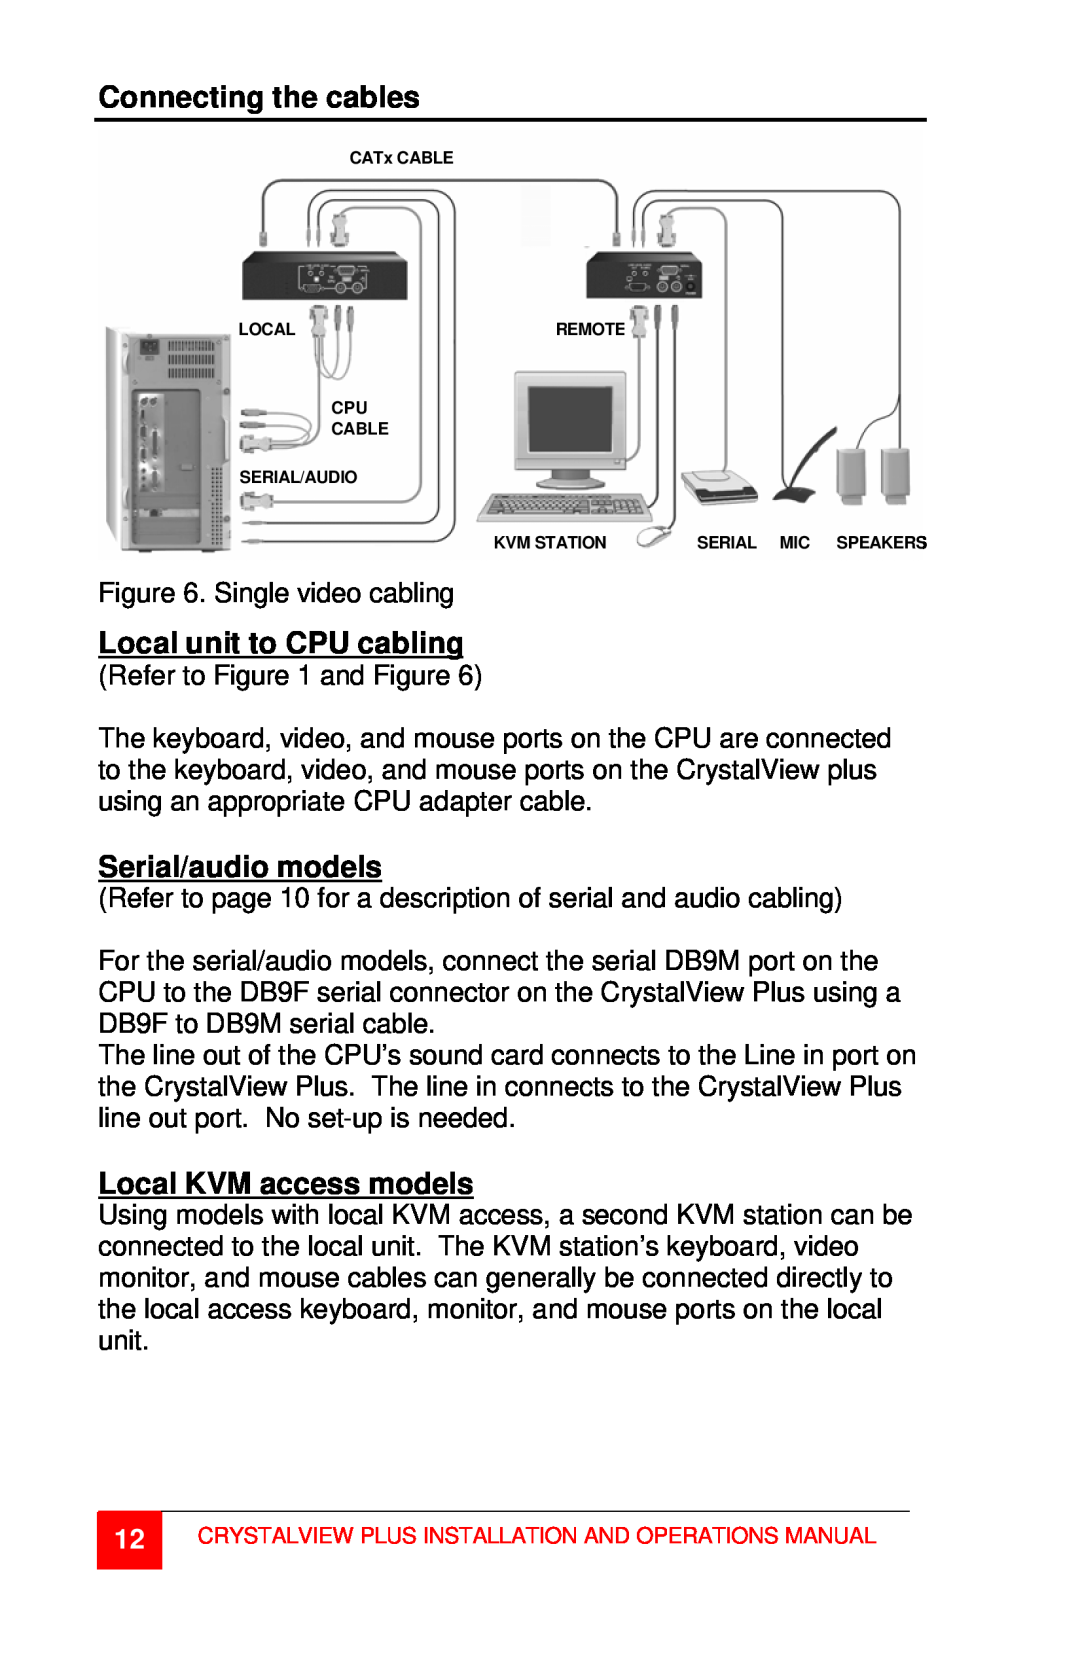 Rose electronic CrystalView Plus manual Connecting the cables, Local unit to CPU cabling, Serial/audio models 